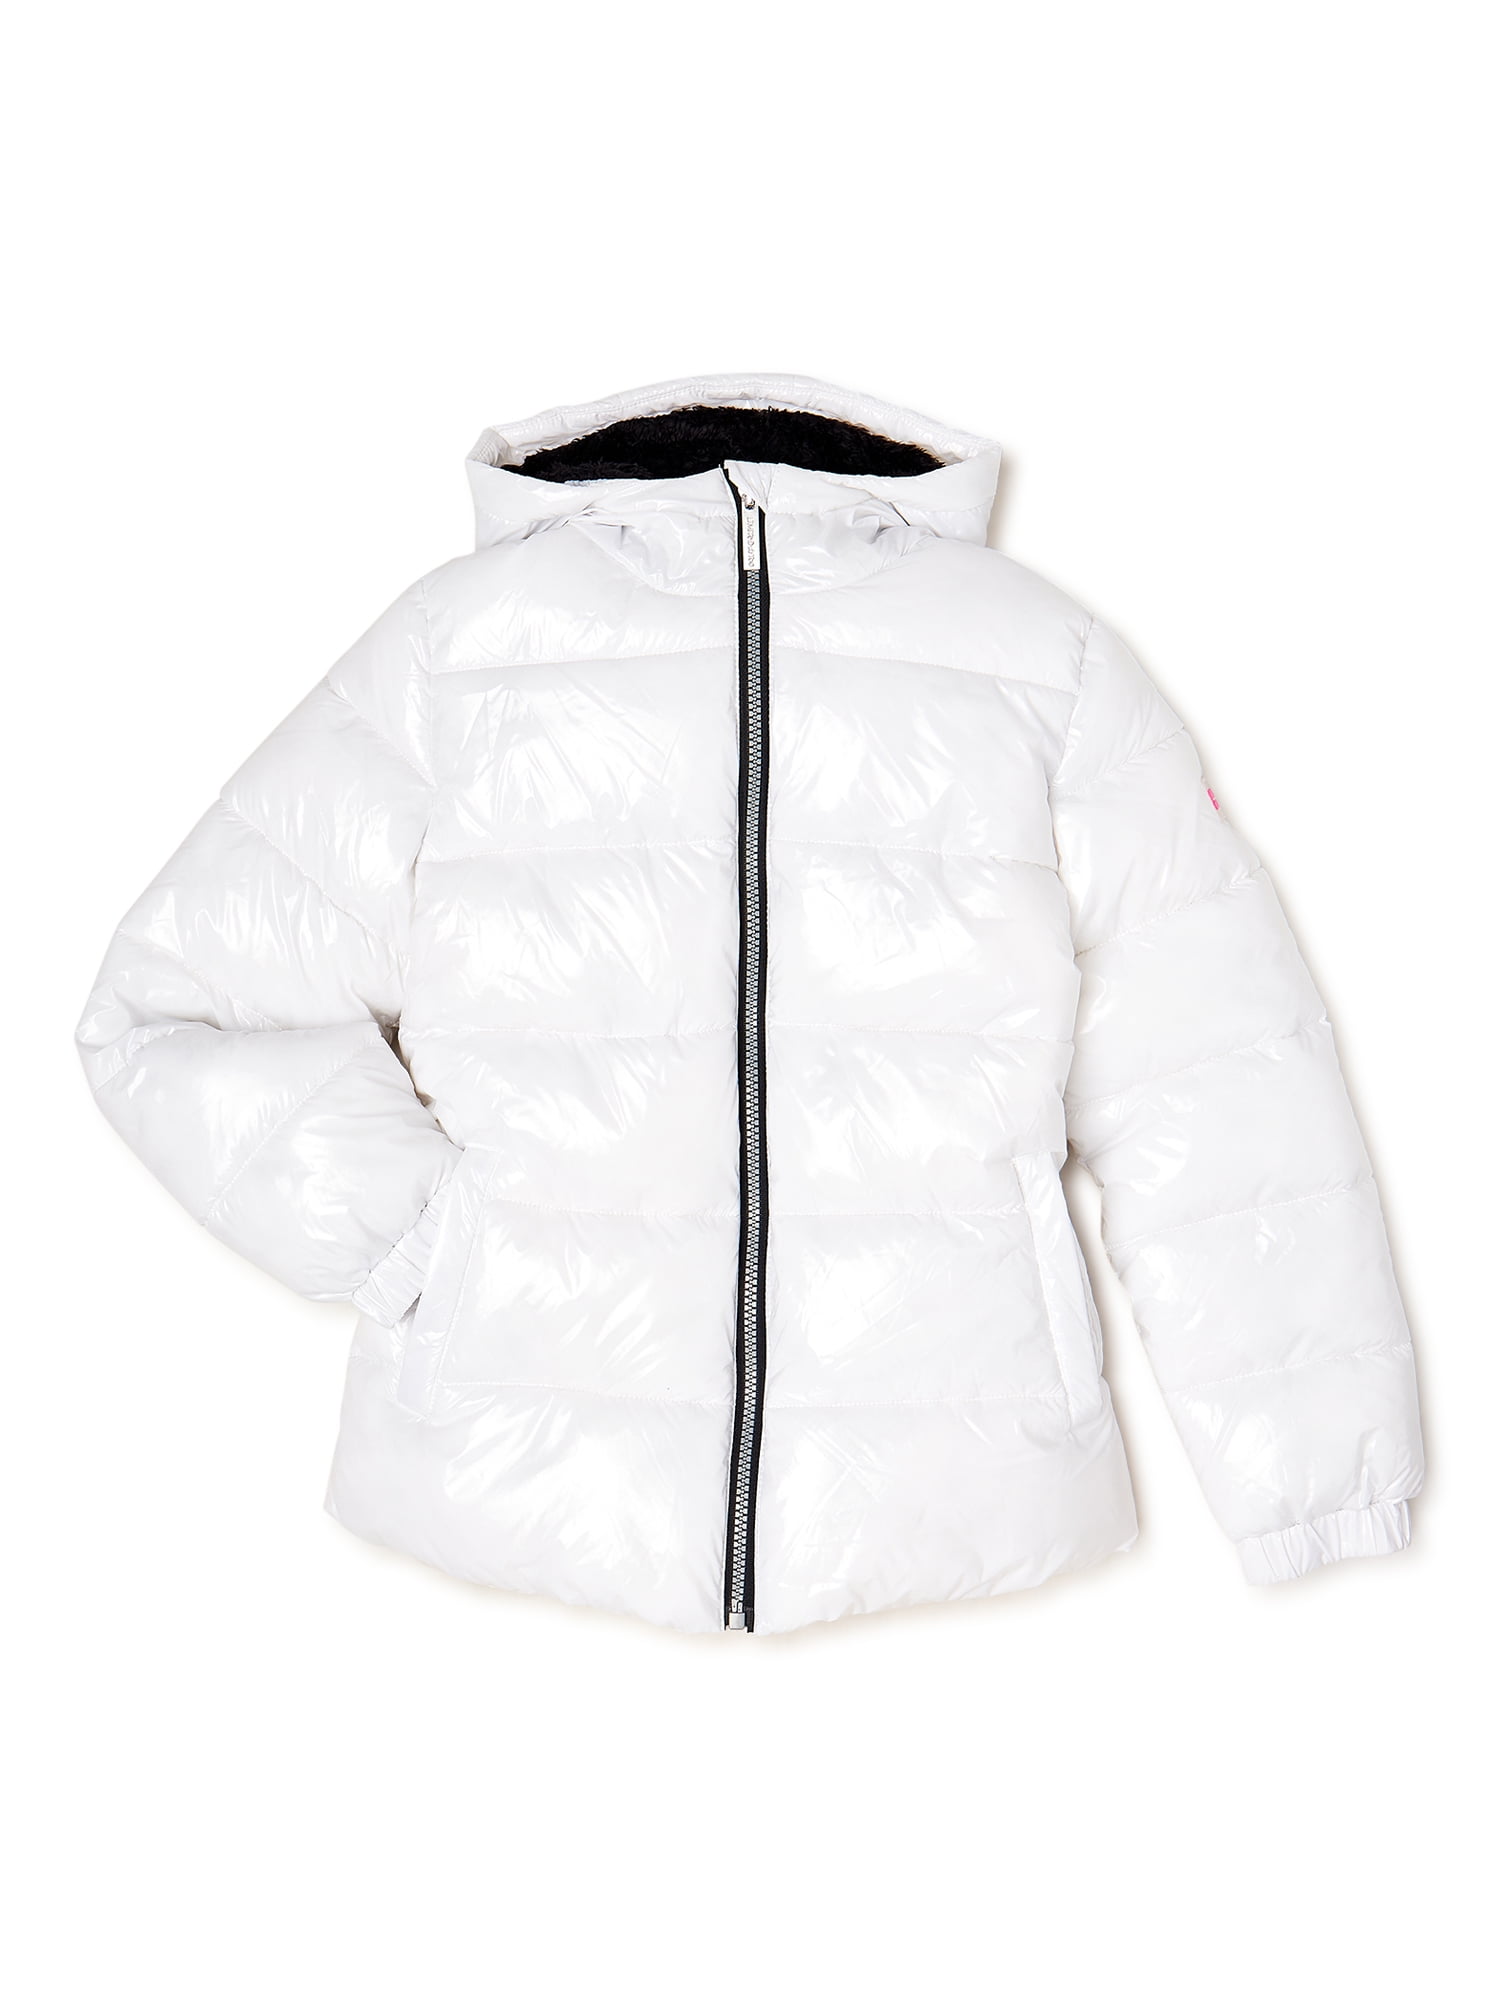 Limited Too Girls’ Solid Hooded Puffer Coat, Sizes 4-16 - Walmart.com